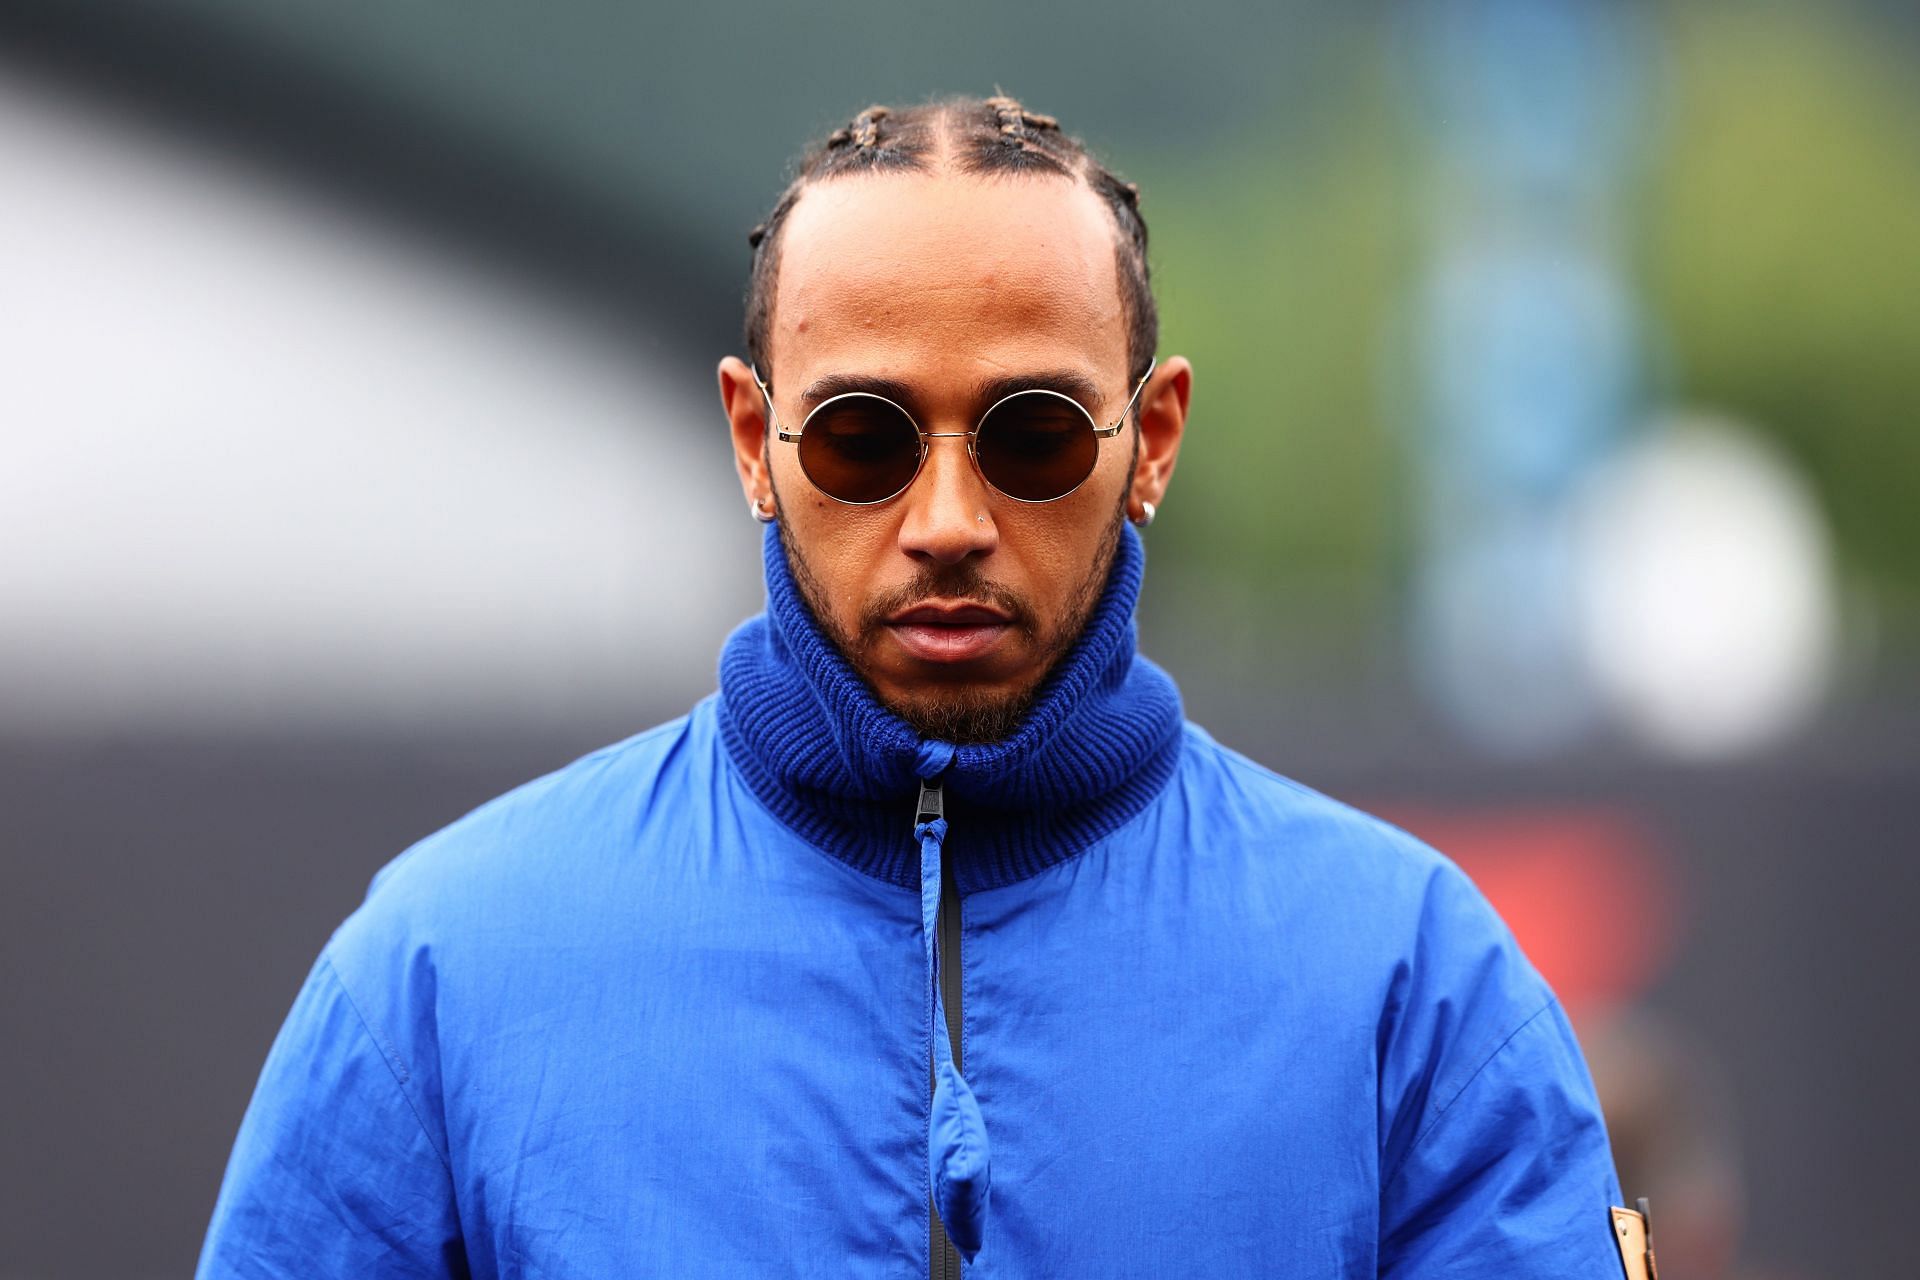 Lewis Hamilton of Great Britain and Mercedes walks in the Paddock during previews ahead of the F1 Grand Prix of Austria at Red Bull Ring on July 07, 2022 in Spielberg, Austria. (Photo by Clive Rose/Getty Images)